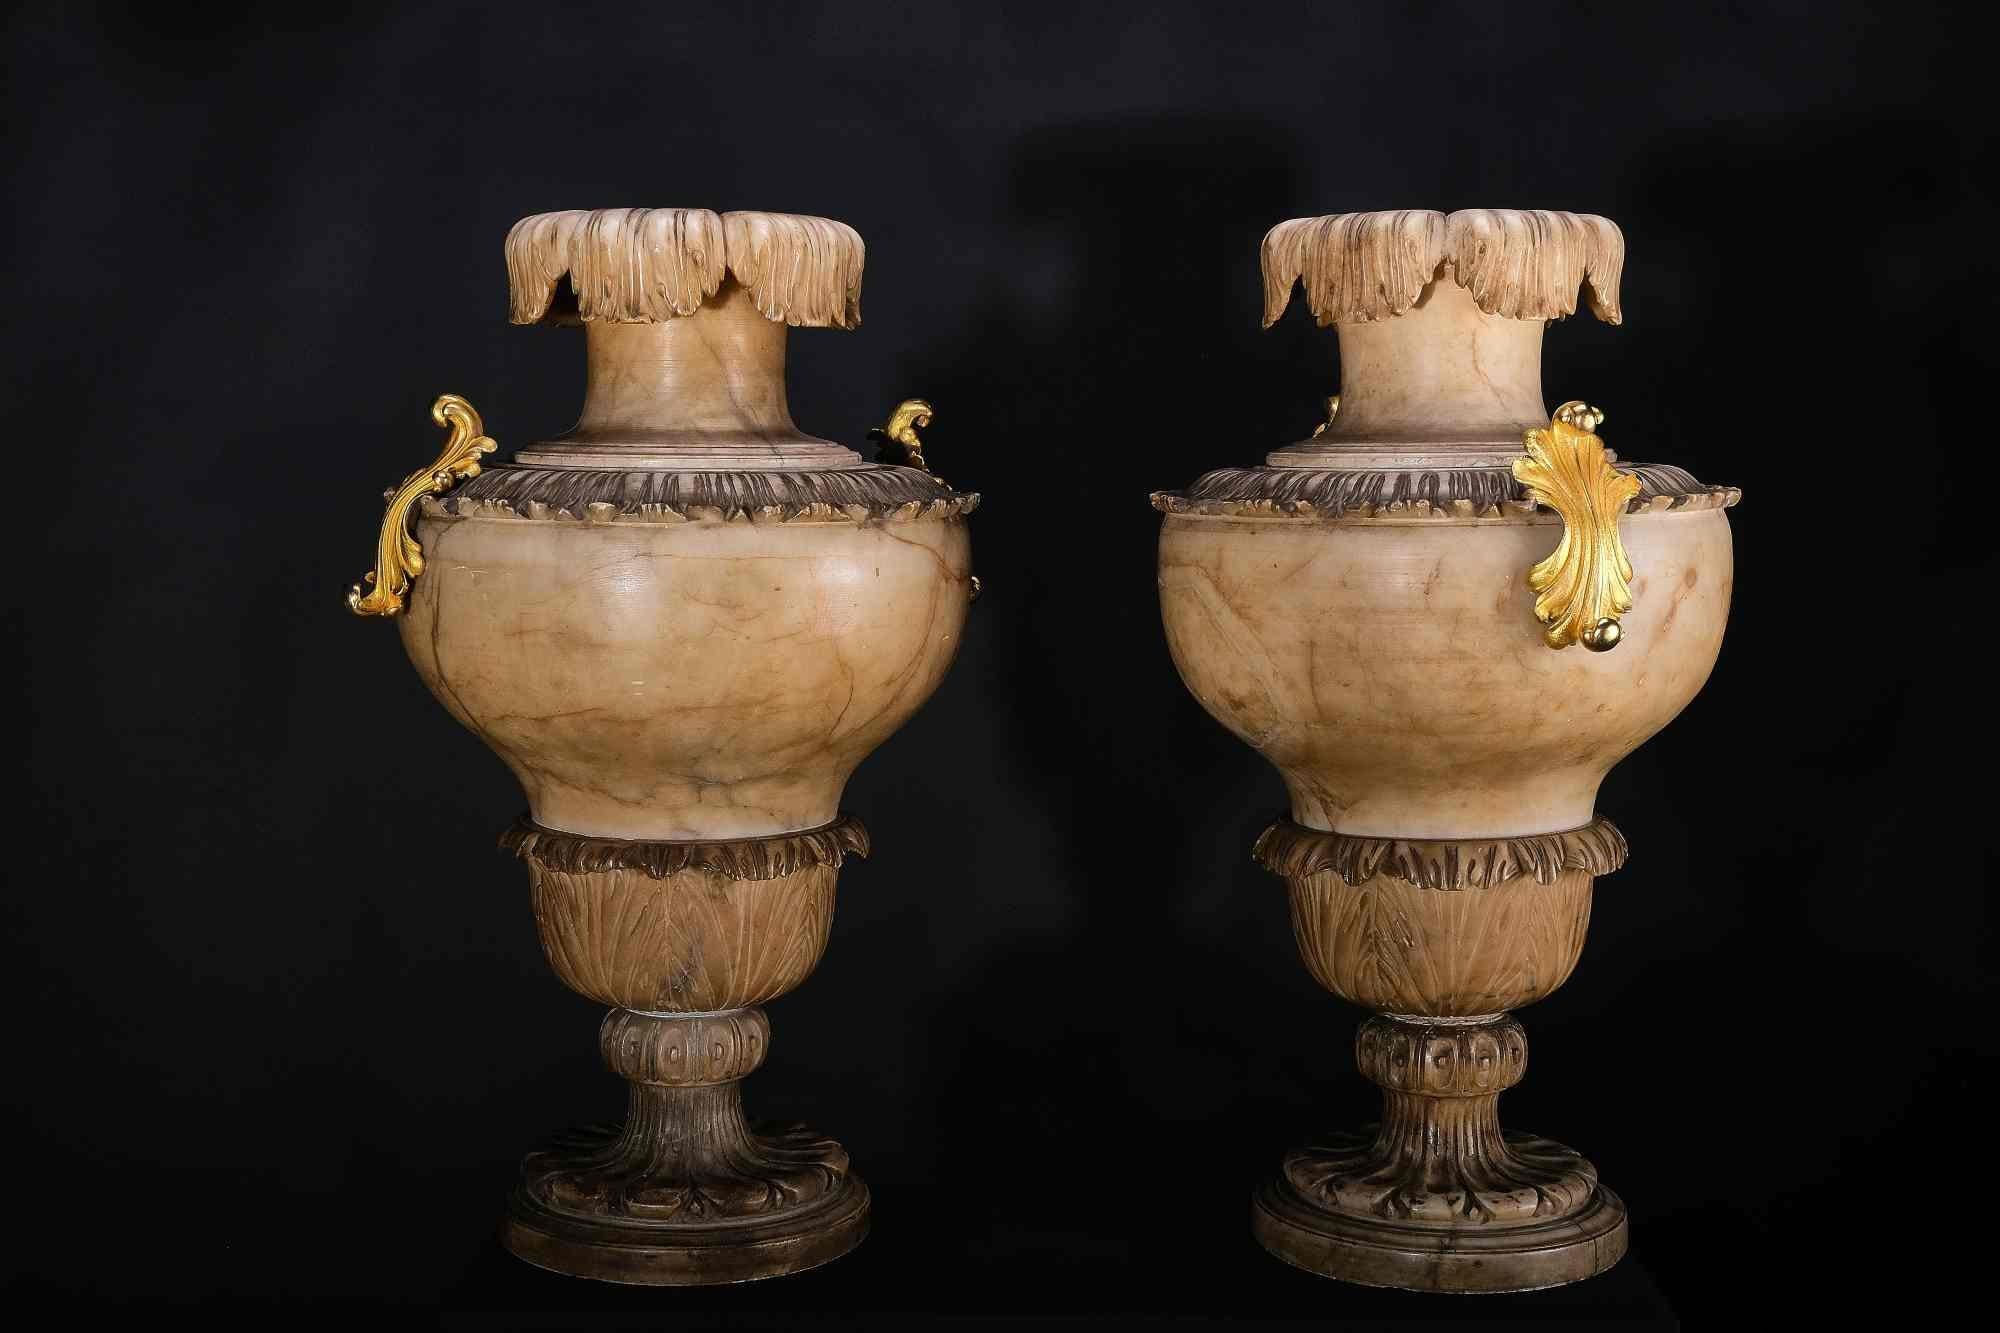 The vases have a baluster shape and are richly decorated with foliage and acanthus. The foot is multiple and decorated, the shoulder has a band of peripheral foliage with mounted and fire-gilded handles. The collar ends with a collar overflowing